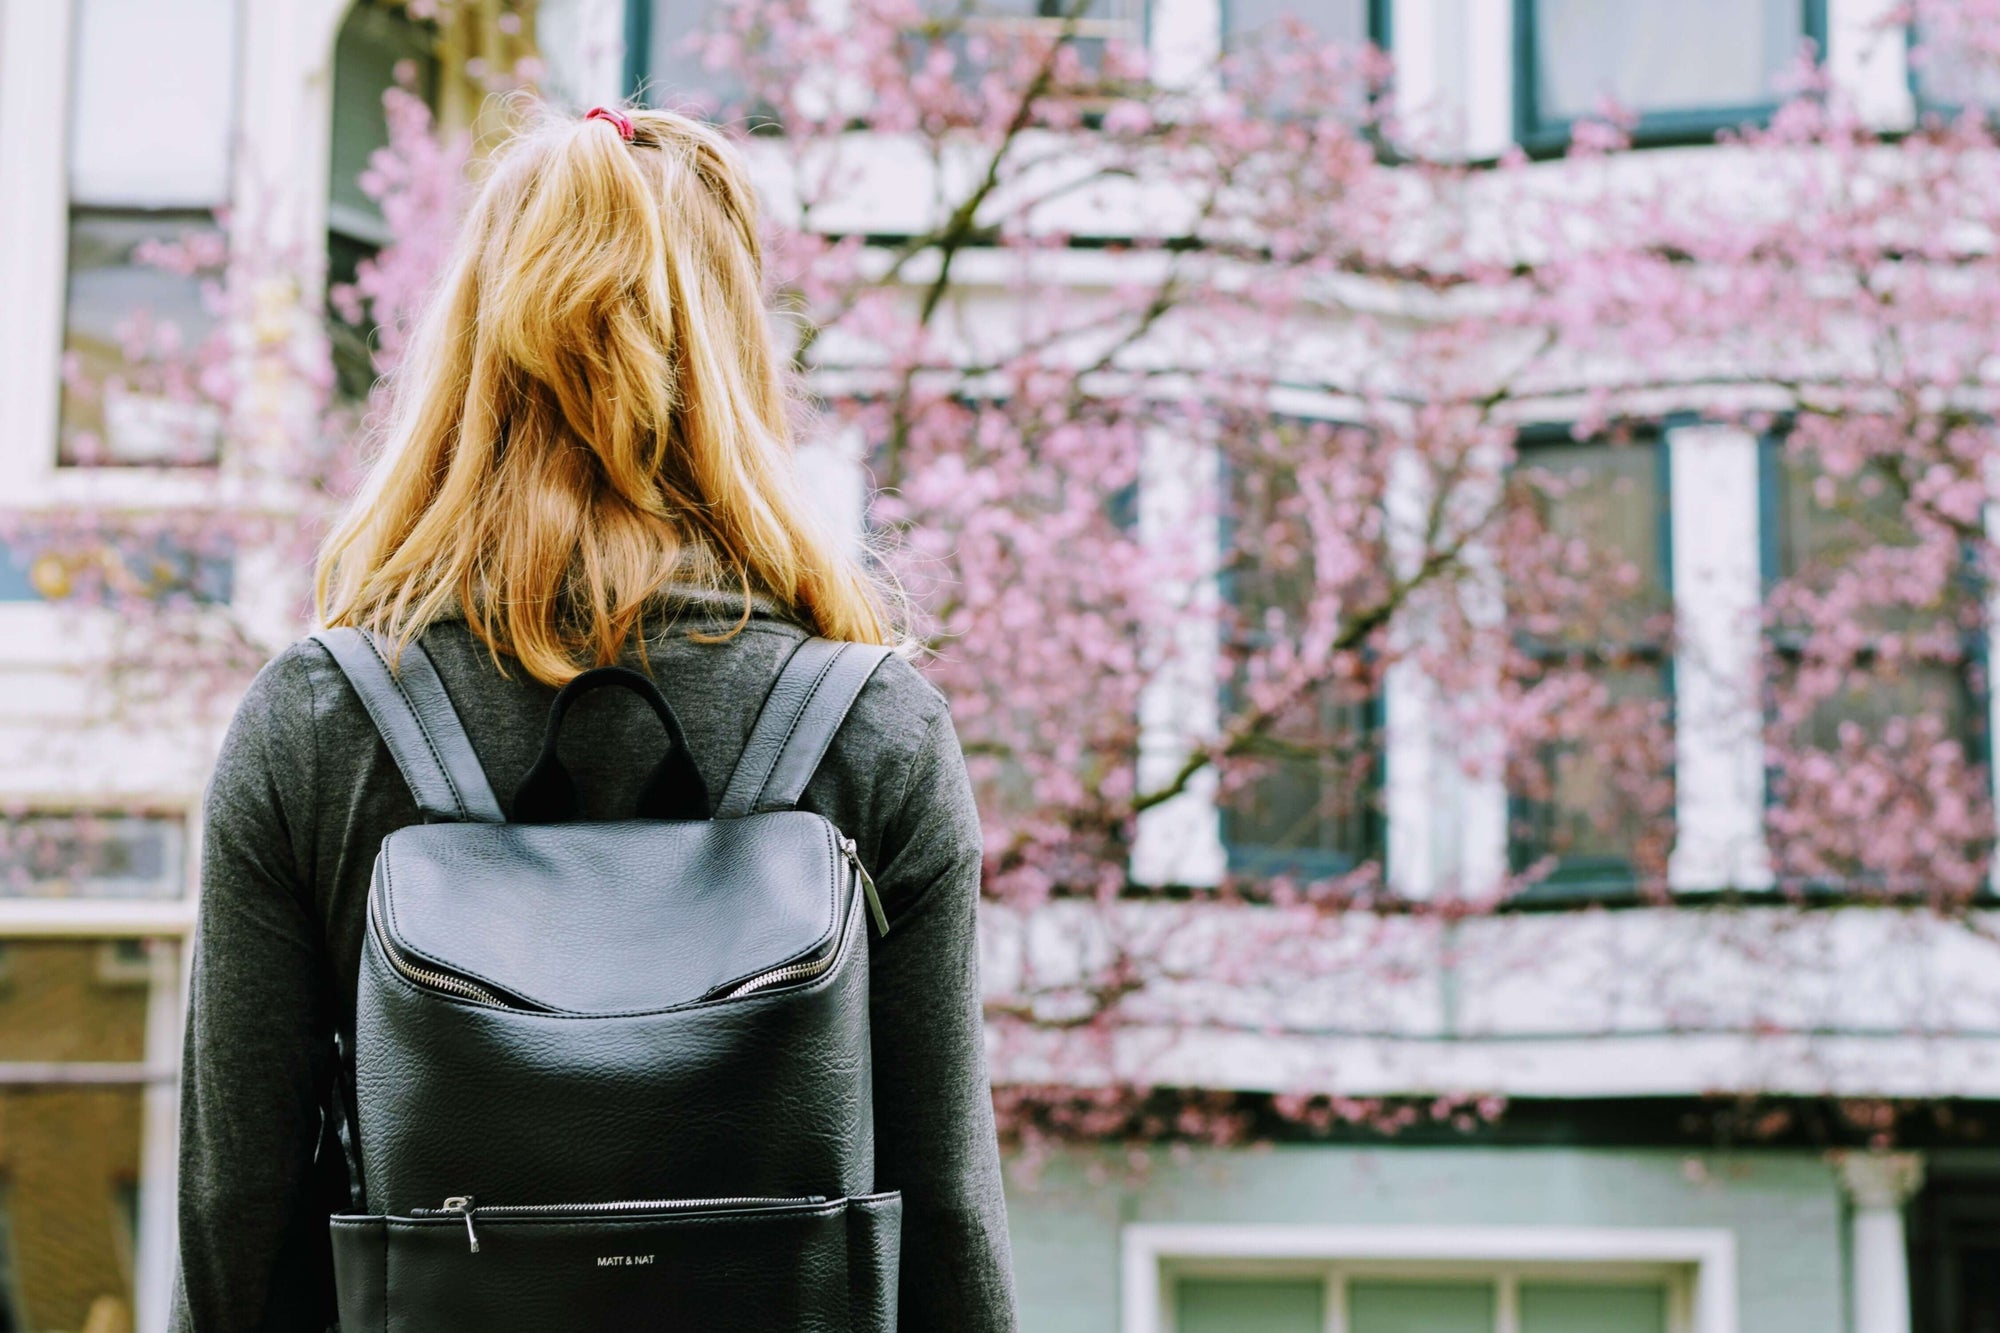 A woman with blonde hair stands with her back to the camera, facing a white building with cherry blossom trees in bloom in front of it. She wears a black backpack.